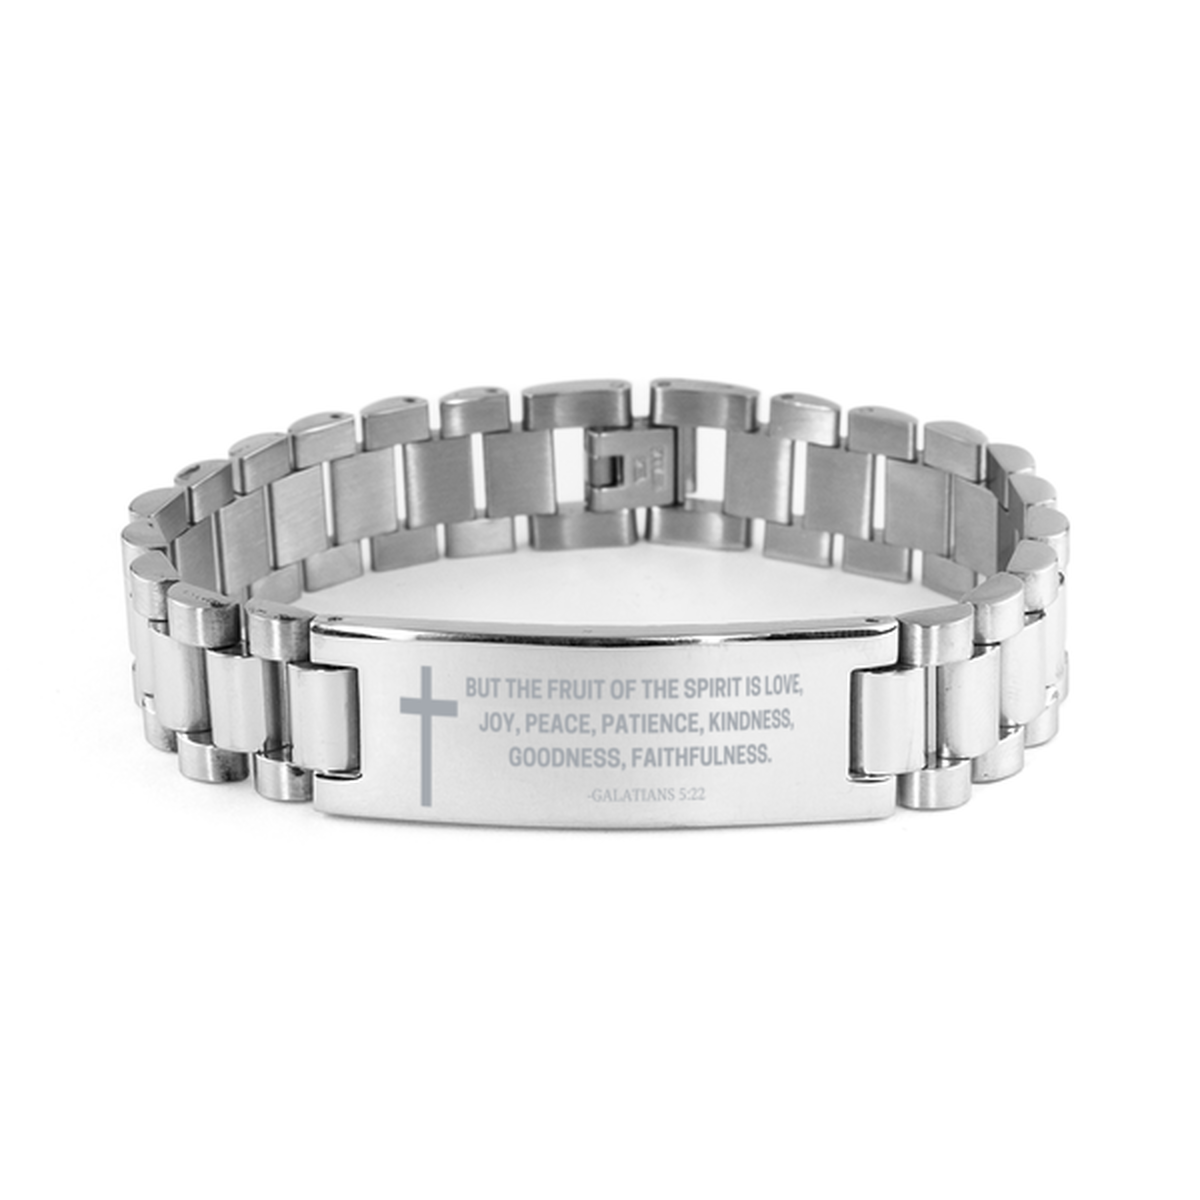 Baptism Gifts For Teenage Boys Girls, Christian Bible Verse Ladder Stainless Steel Bracelet, But the fruit of the Spirit, Catholic Confirmation Gifts for Son, Godson, Grandson, Nephew